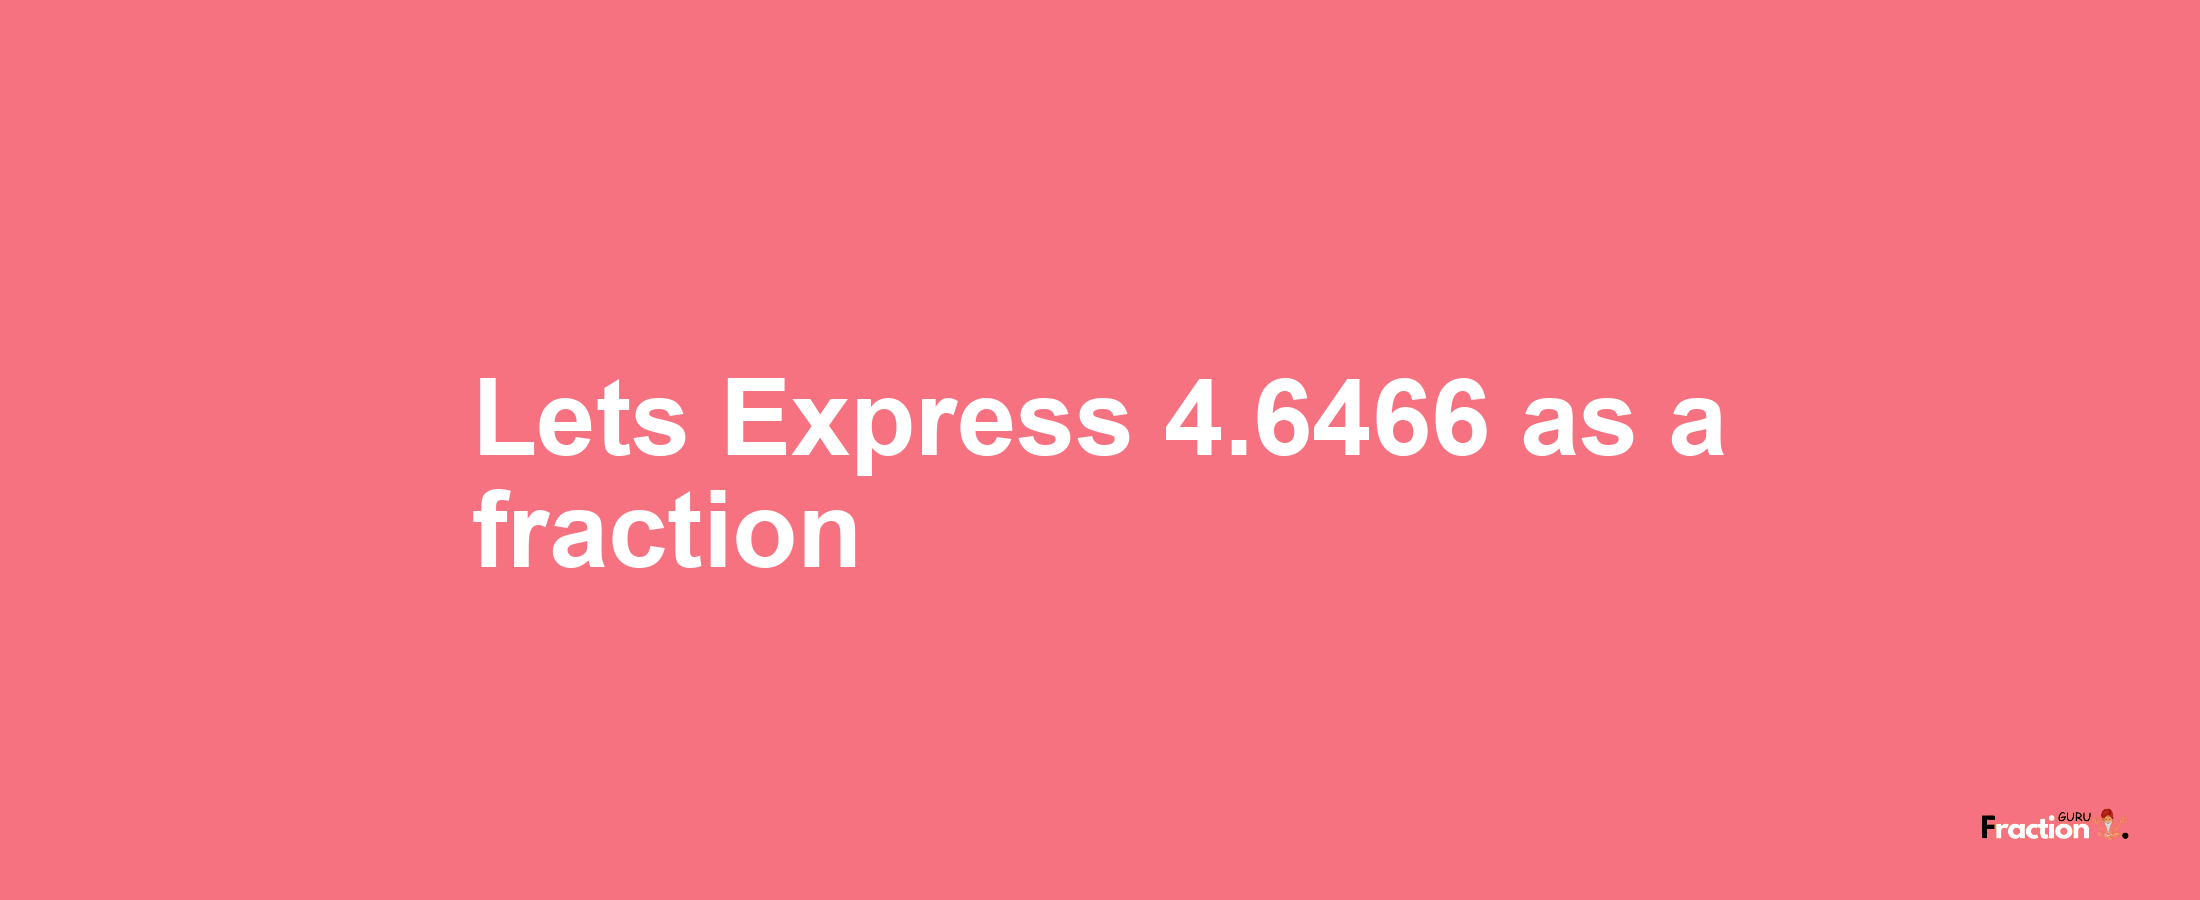 Lets Express 4.6466 as afraction